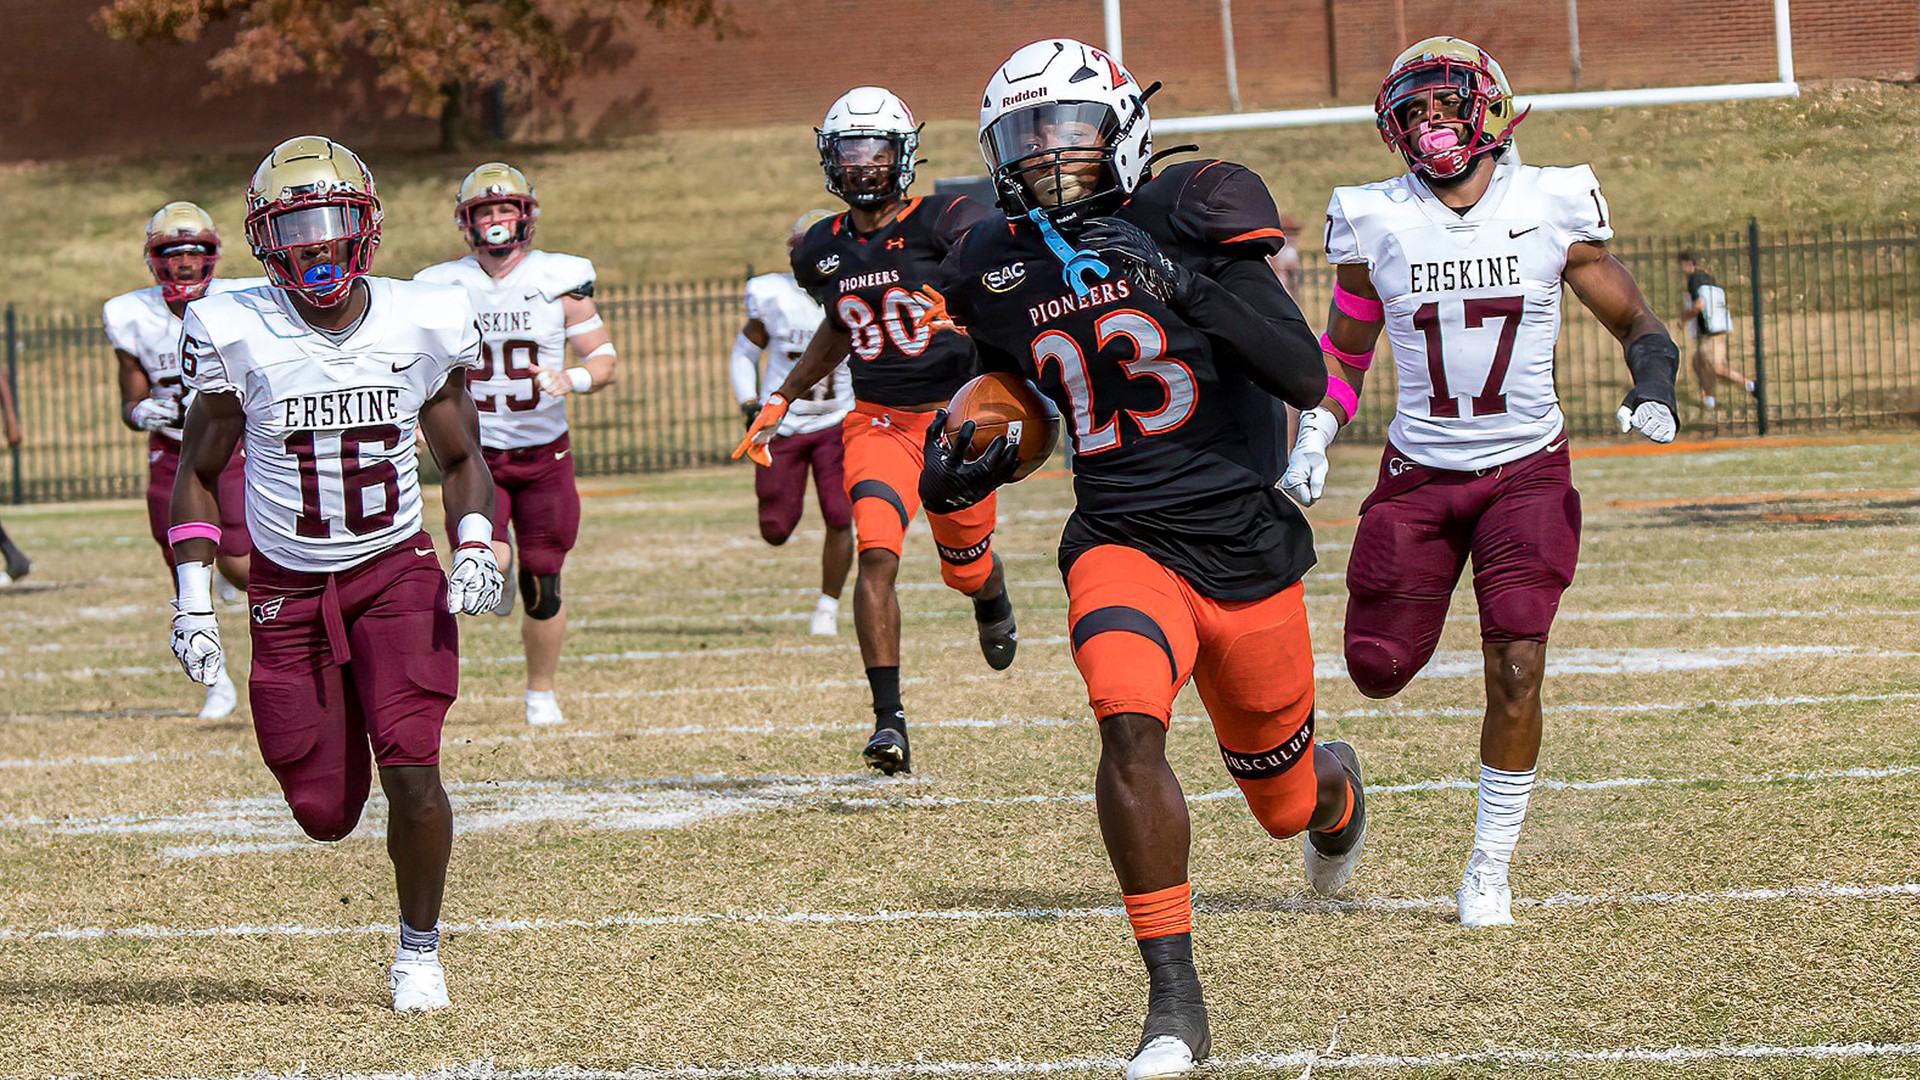 Marquel Pittman sparked a 35-0 run by the Pioneers with this 96-yard kickoff return for a TD in Tusculum's 49-14 win over Erskine (photo by Chuck Williams)